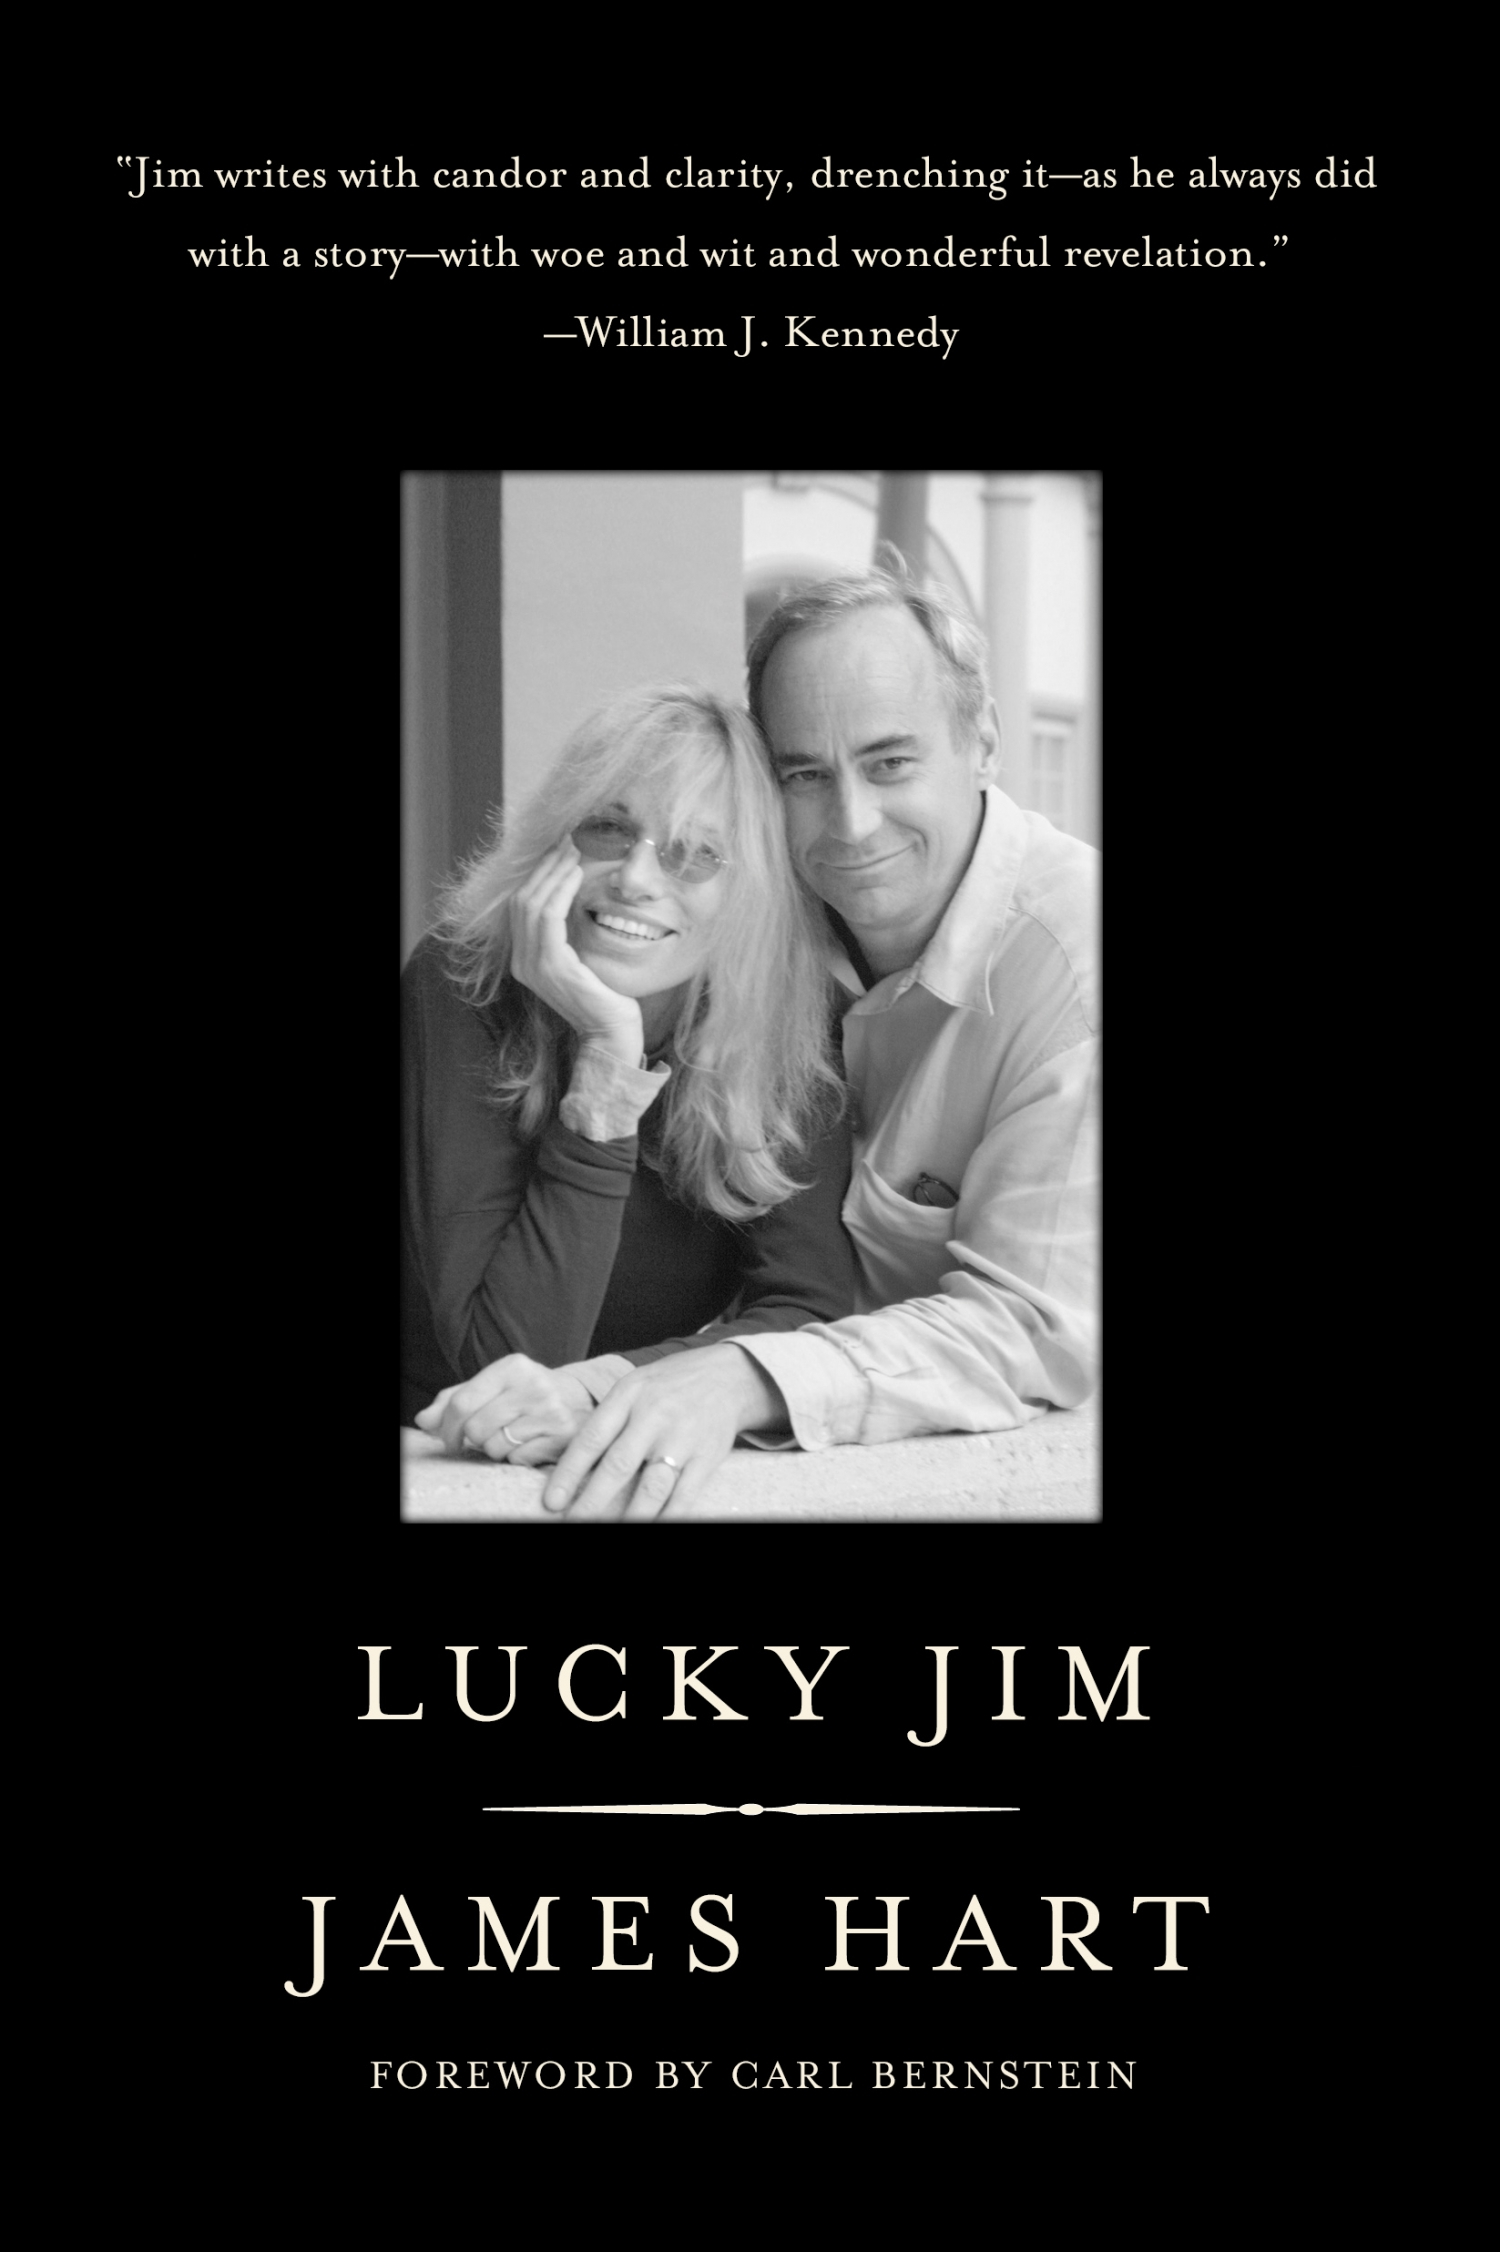 book review lucky jim